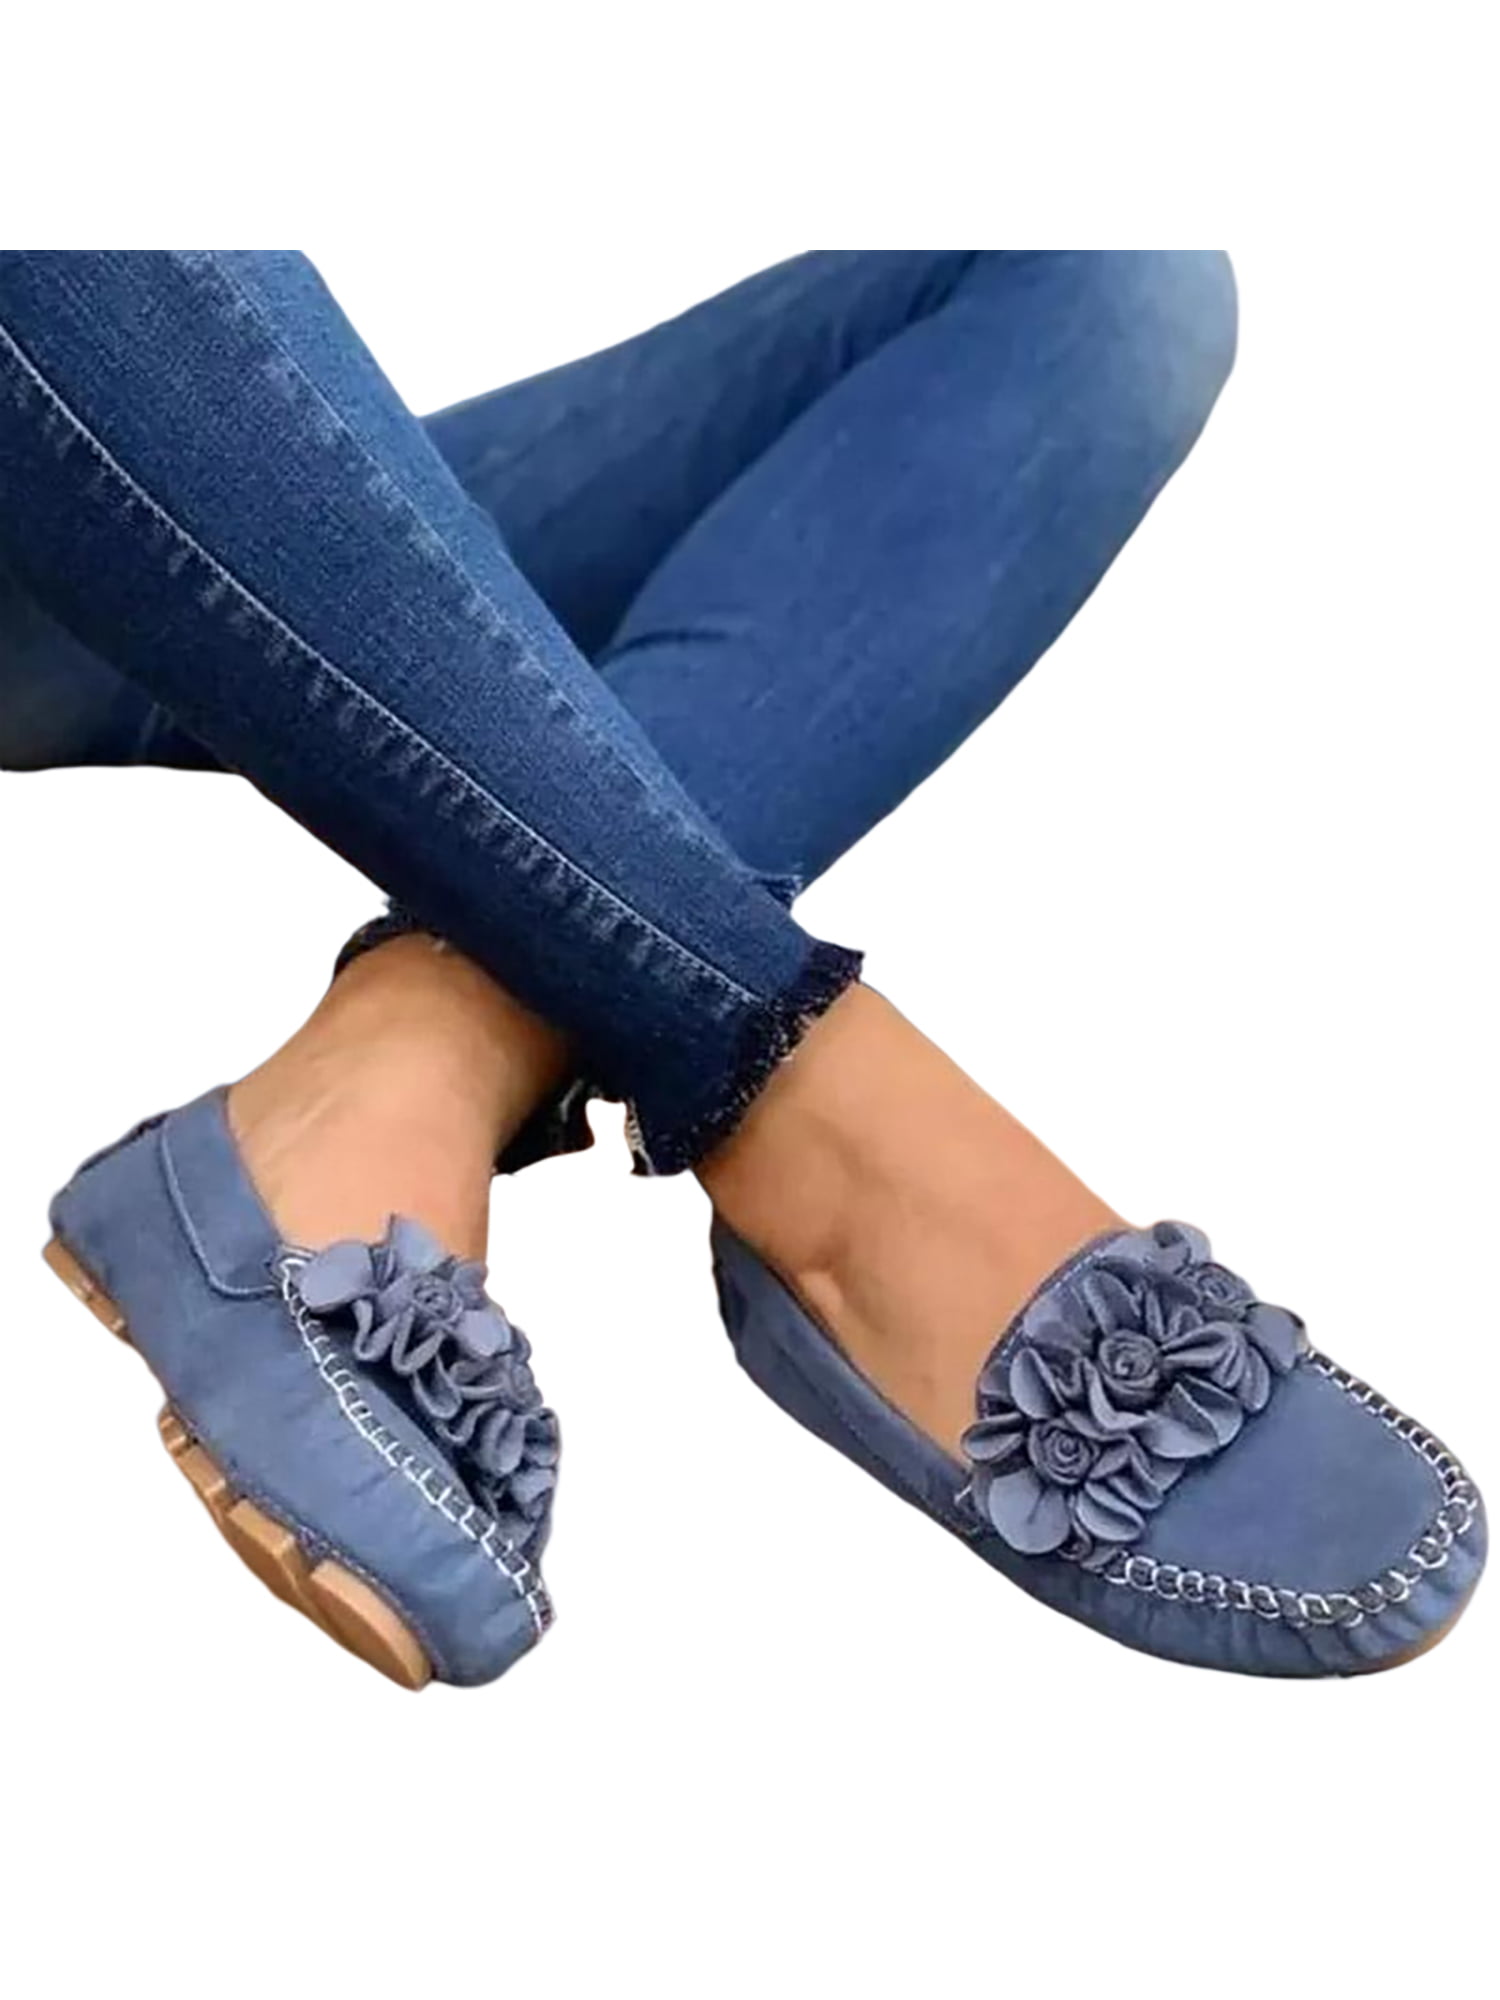 Women Slip On Loafers Leather Casual Ballet Flats Walking Shoes Lightweight Ladies Comfy Work Shoes